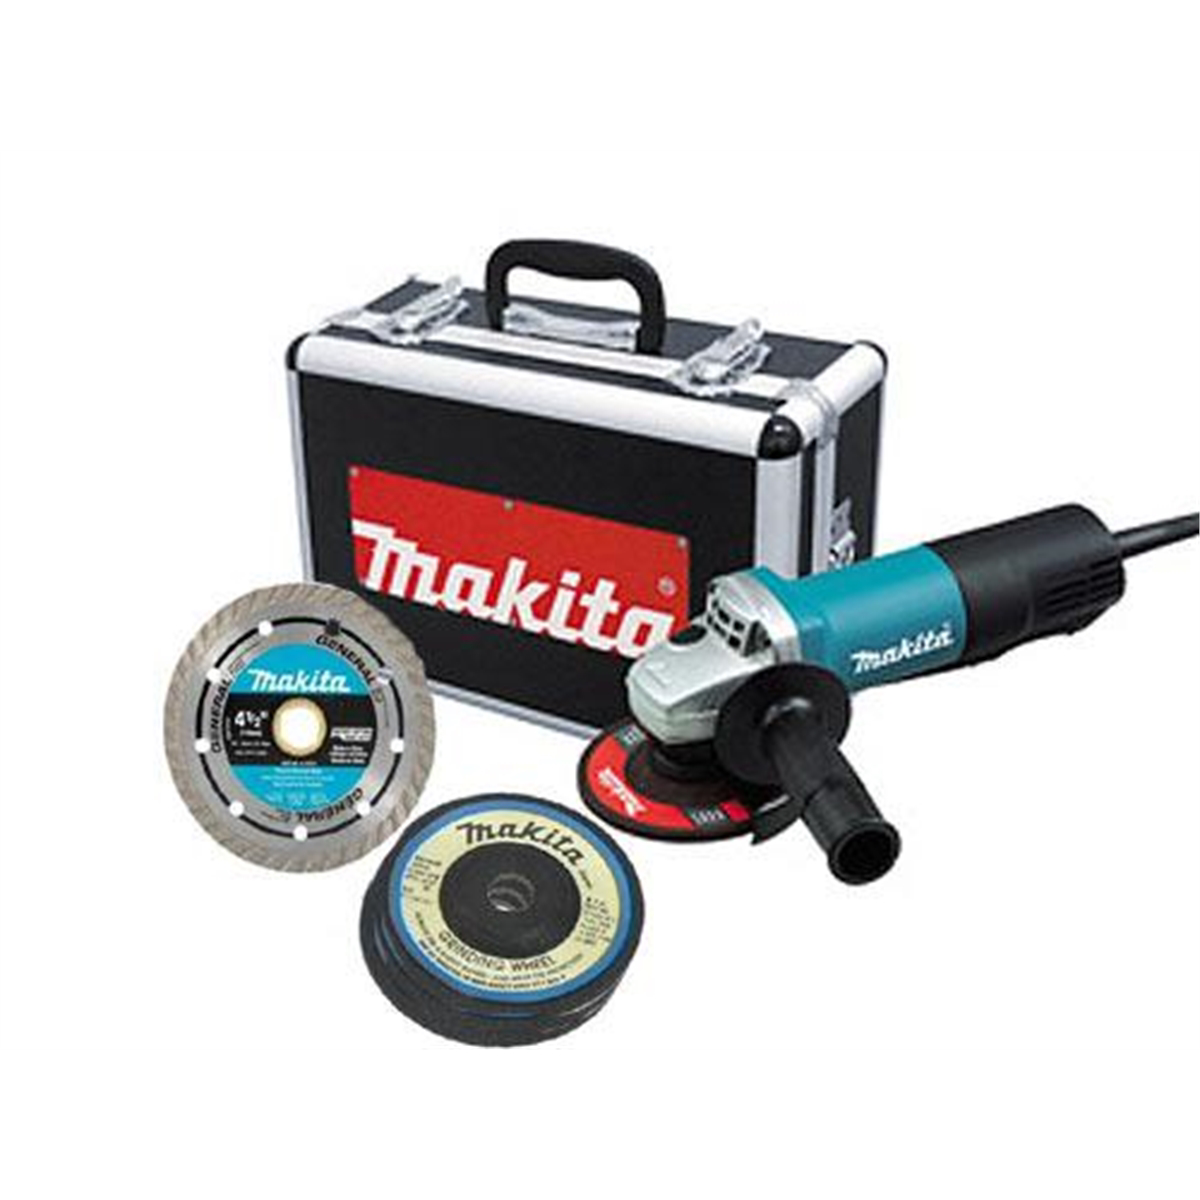 Makita 9557PBX1 4-1/2" 120V 7.5A Corded Angle Grinder w/Paddle Switch & Case - image 1 of 5